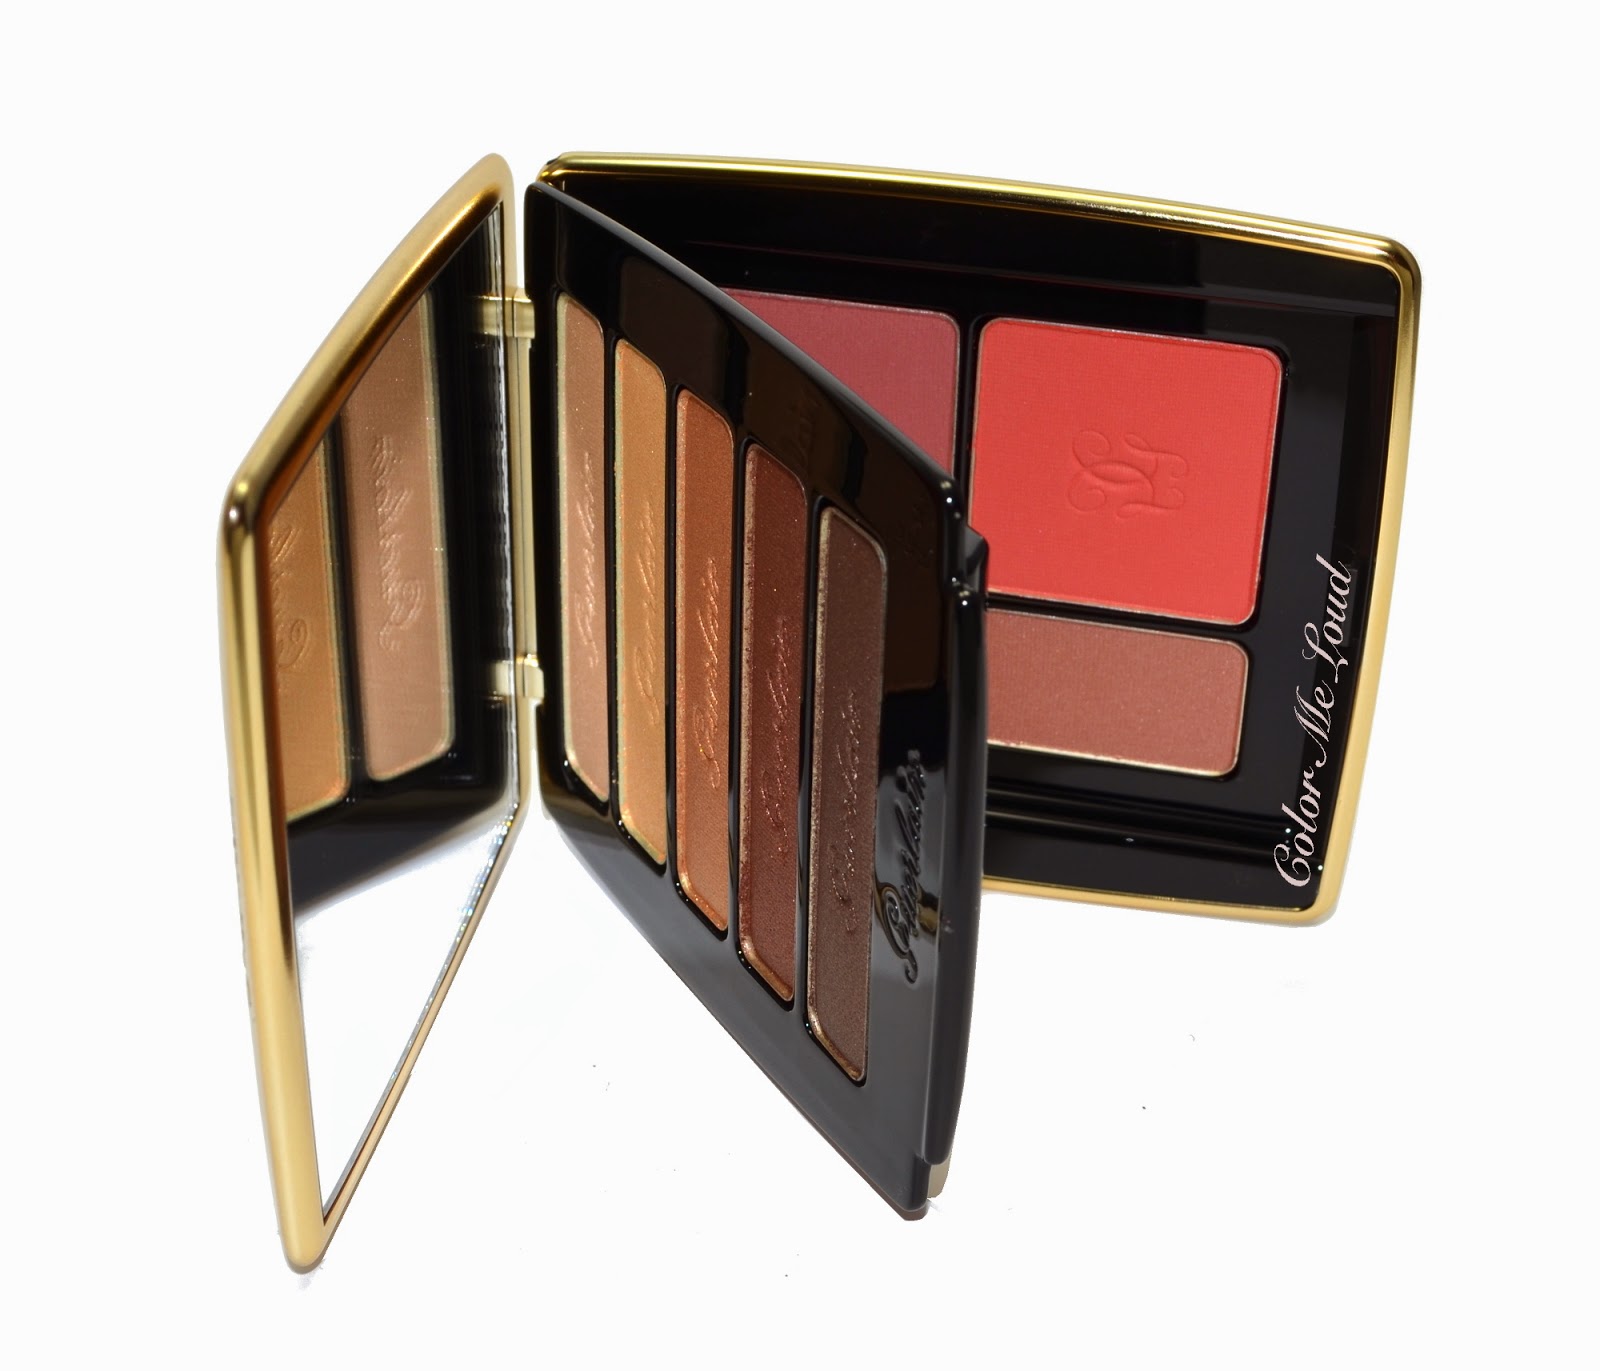 Guerlain Petrouchka Eyes and Blush Palette for A Night At The Opera Holiday 2014 Collection, Review, Swatch, Comparison & FOTD 